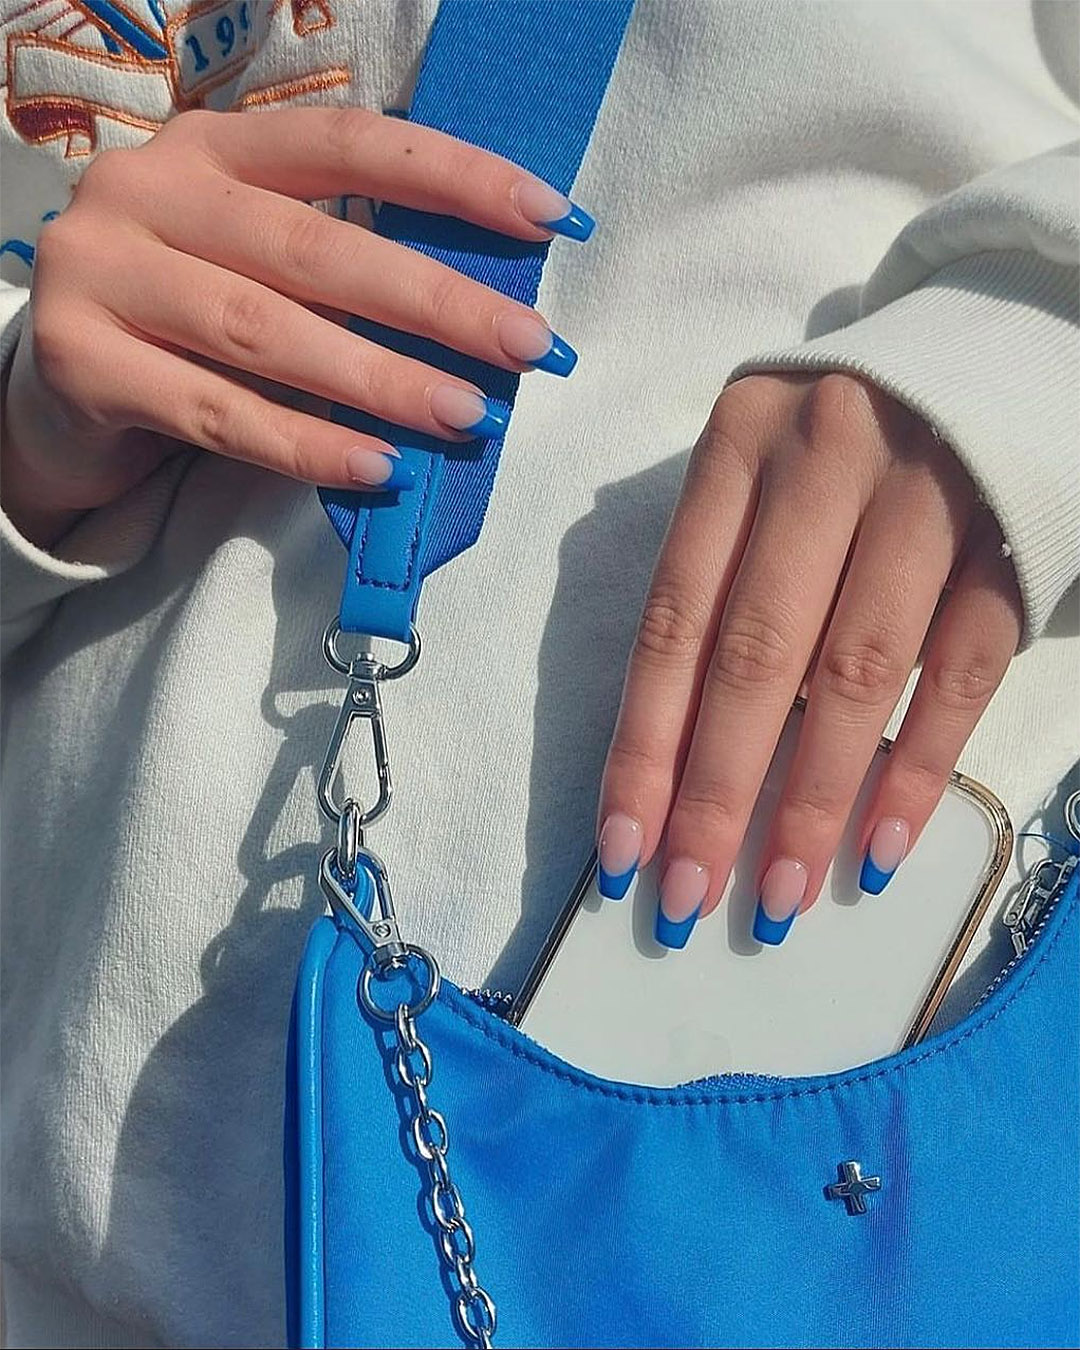 It's all blue and white as someone puts their phone in their bag using blue tipped nails at Inco studio in Ponsonby.